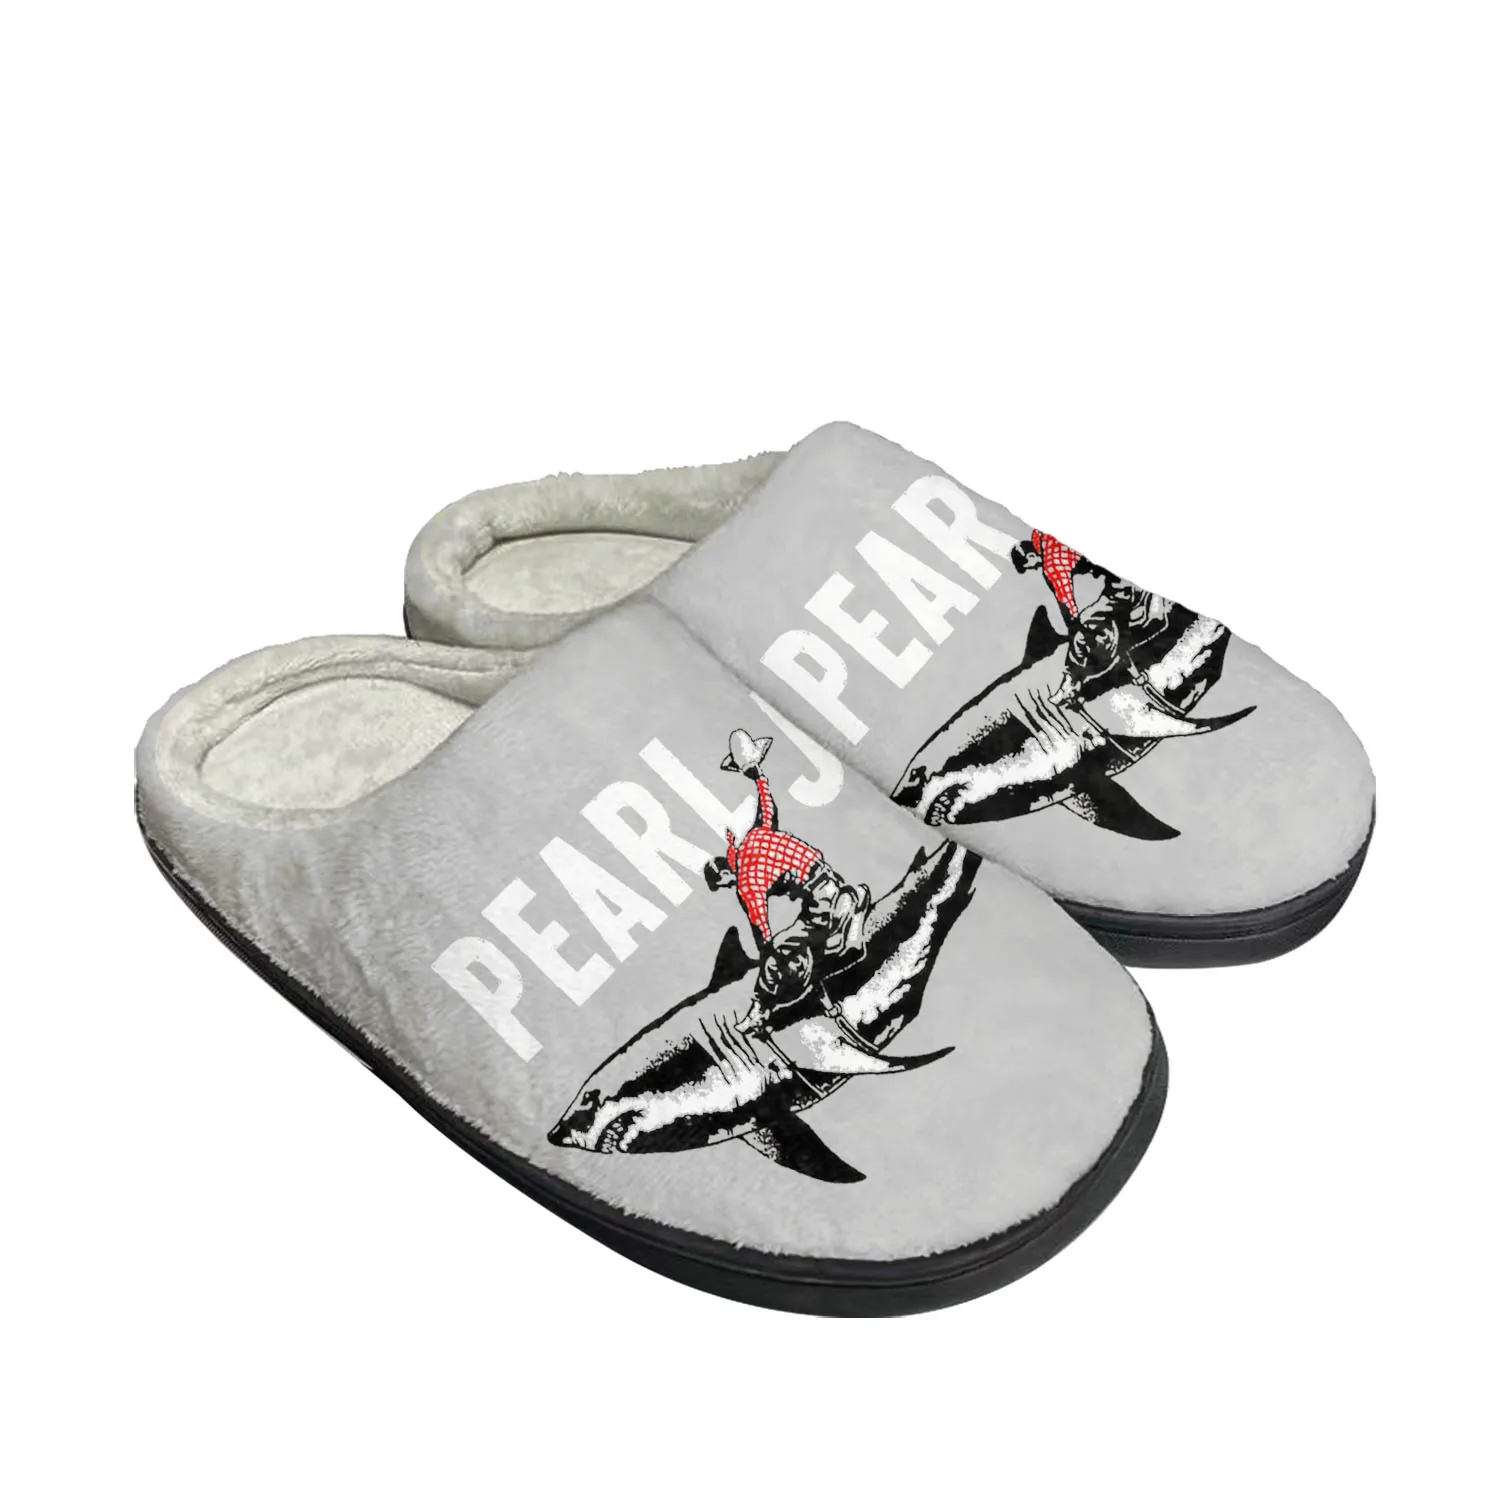 

Pearl Jam Rock Band Pop Home Cotton Custom Slippers Mens Womens Sandals Plush Bedroom Casual Keep Warm Shoe Thermal Slipper